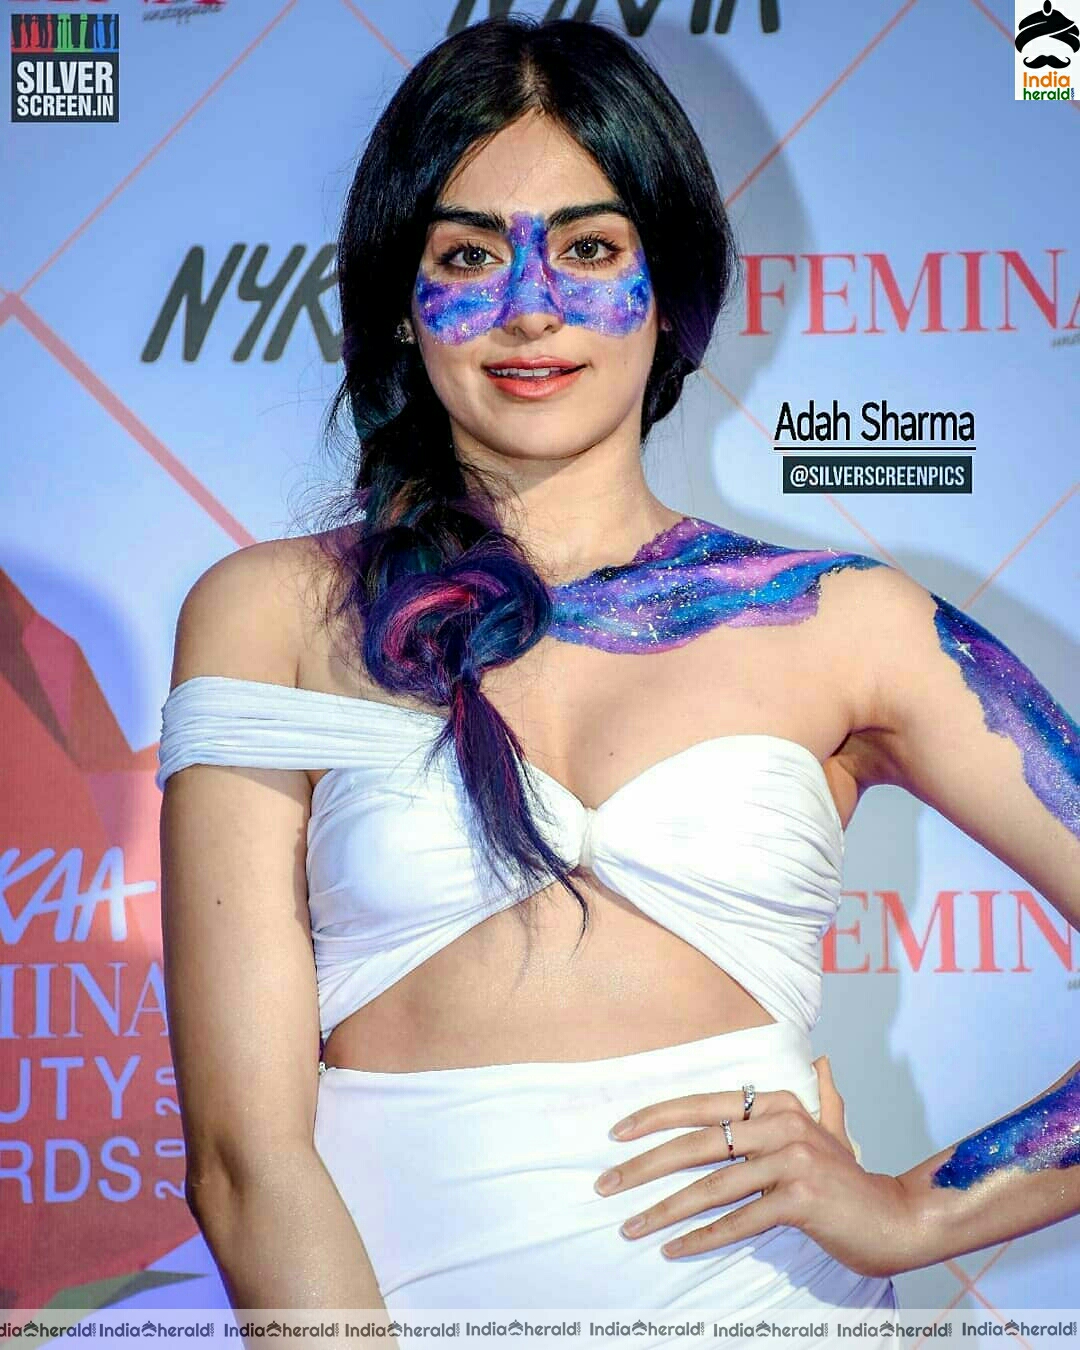 Adah Sharma is too hot to handle in this weird and sexy dress